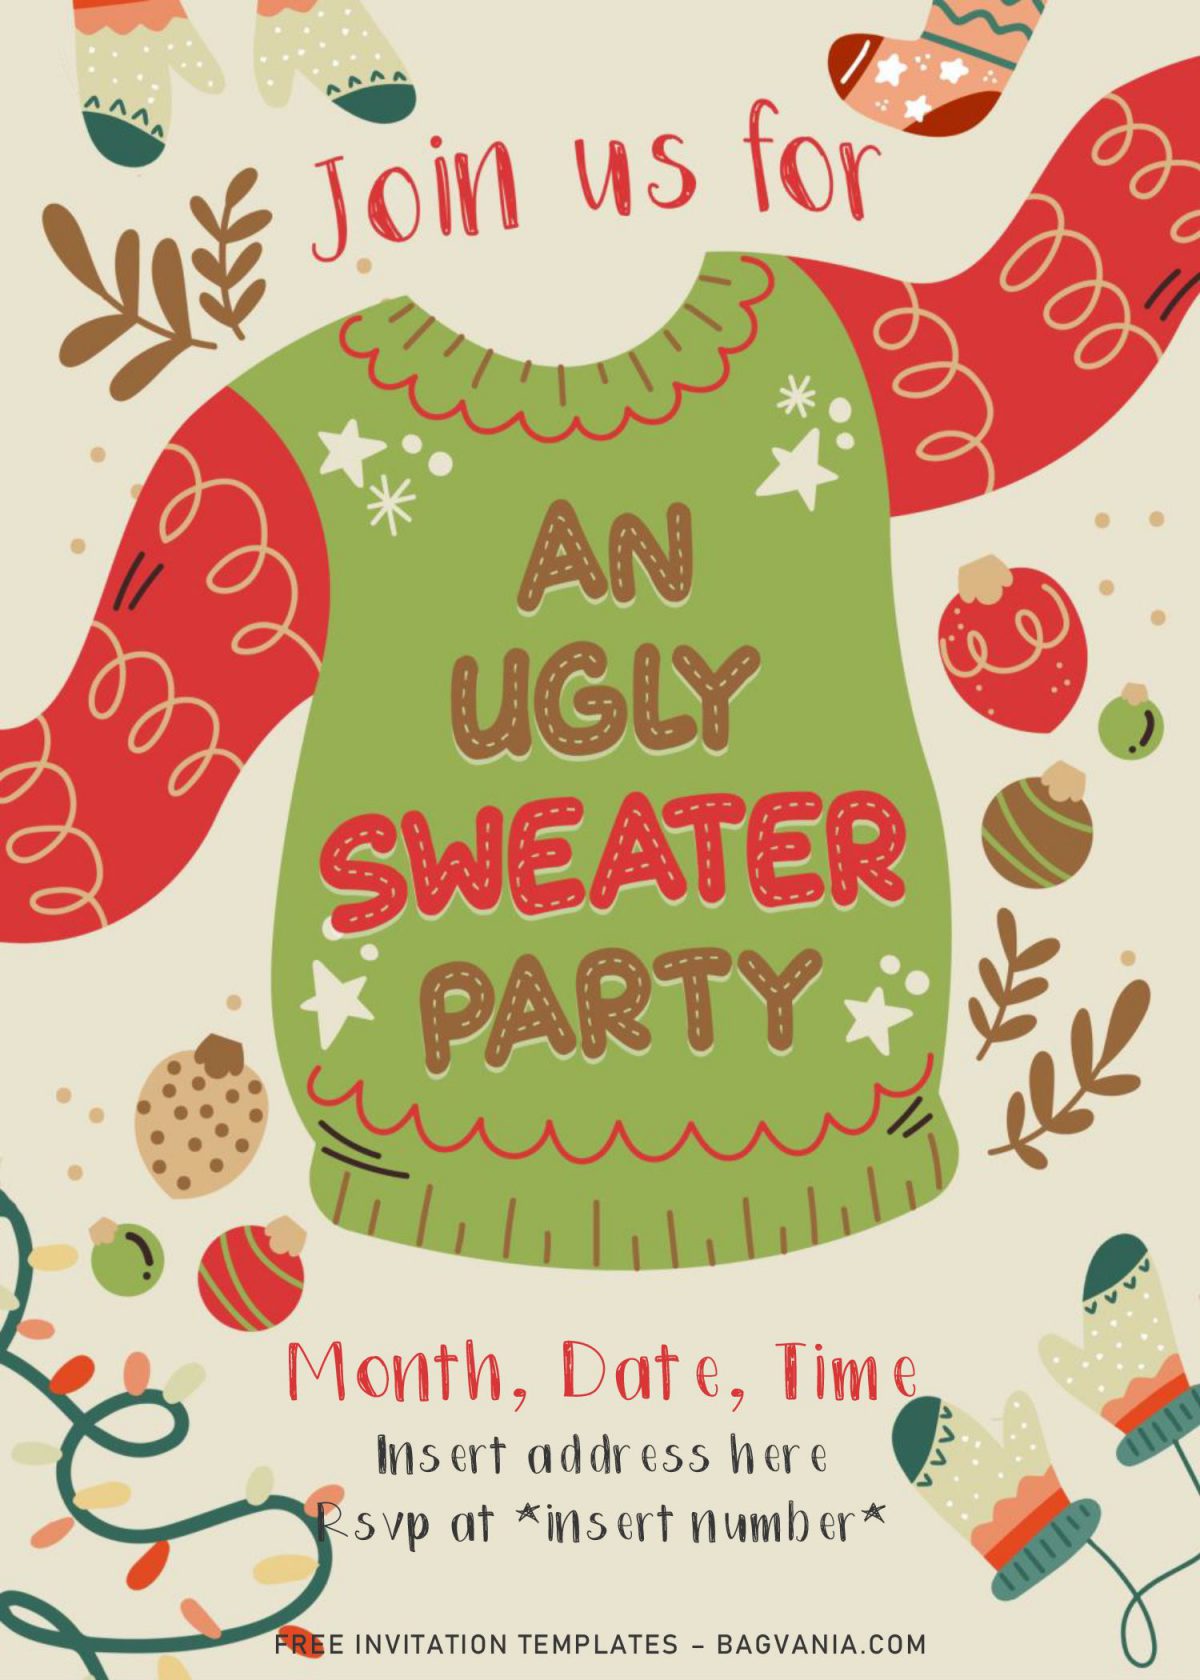 Free Winter Ugly Sweater Birthday Party Invitation Templates For Word and has tan background and Christmas theme